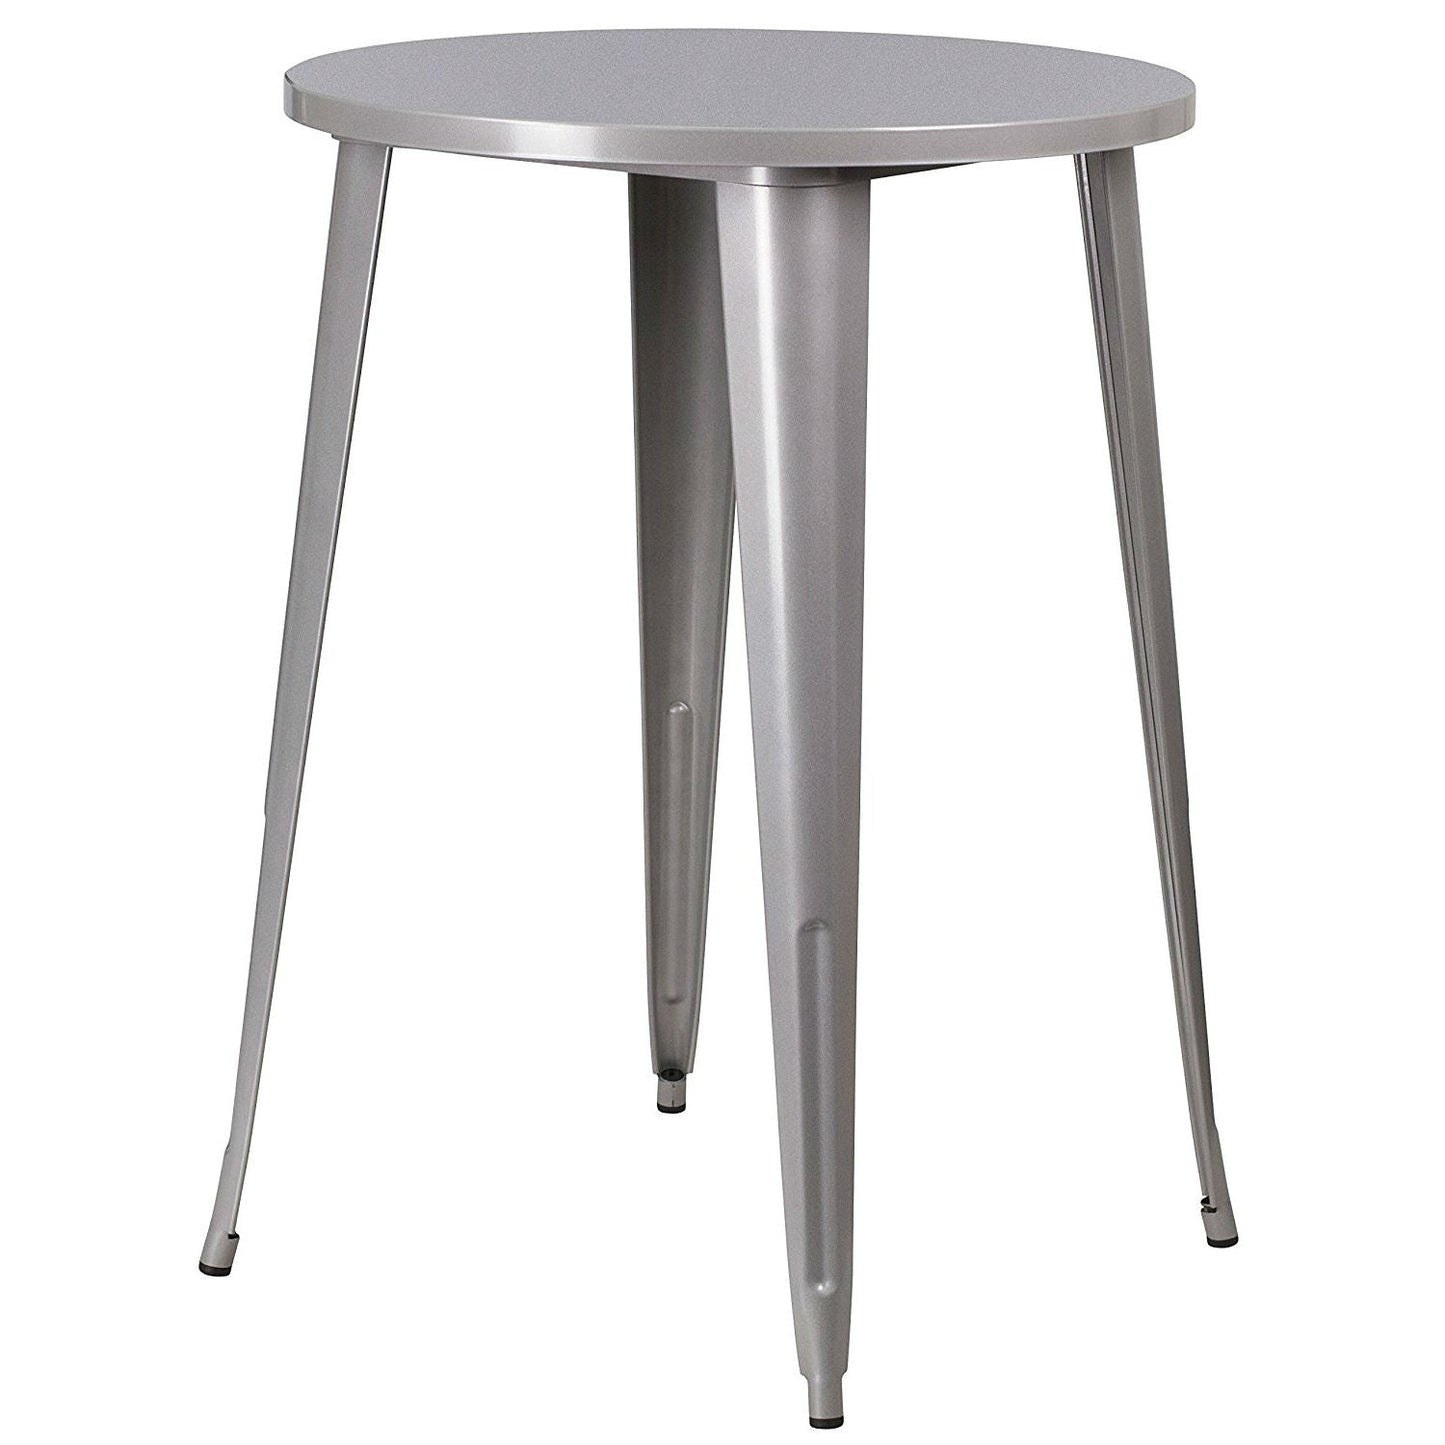 Outdoor > Outdoor Furniture > Patio Tables - Outdoor 30-inch Round Metal Cafe Bar Patio Table In Silver